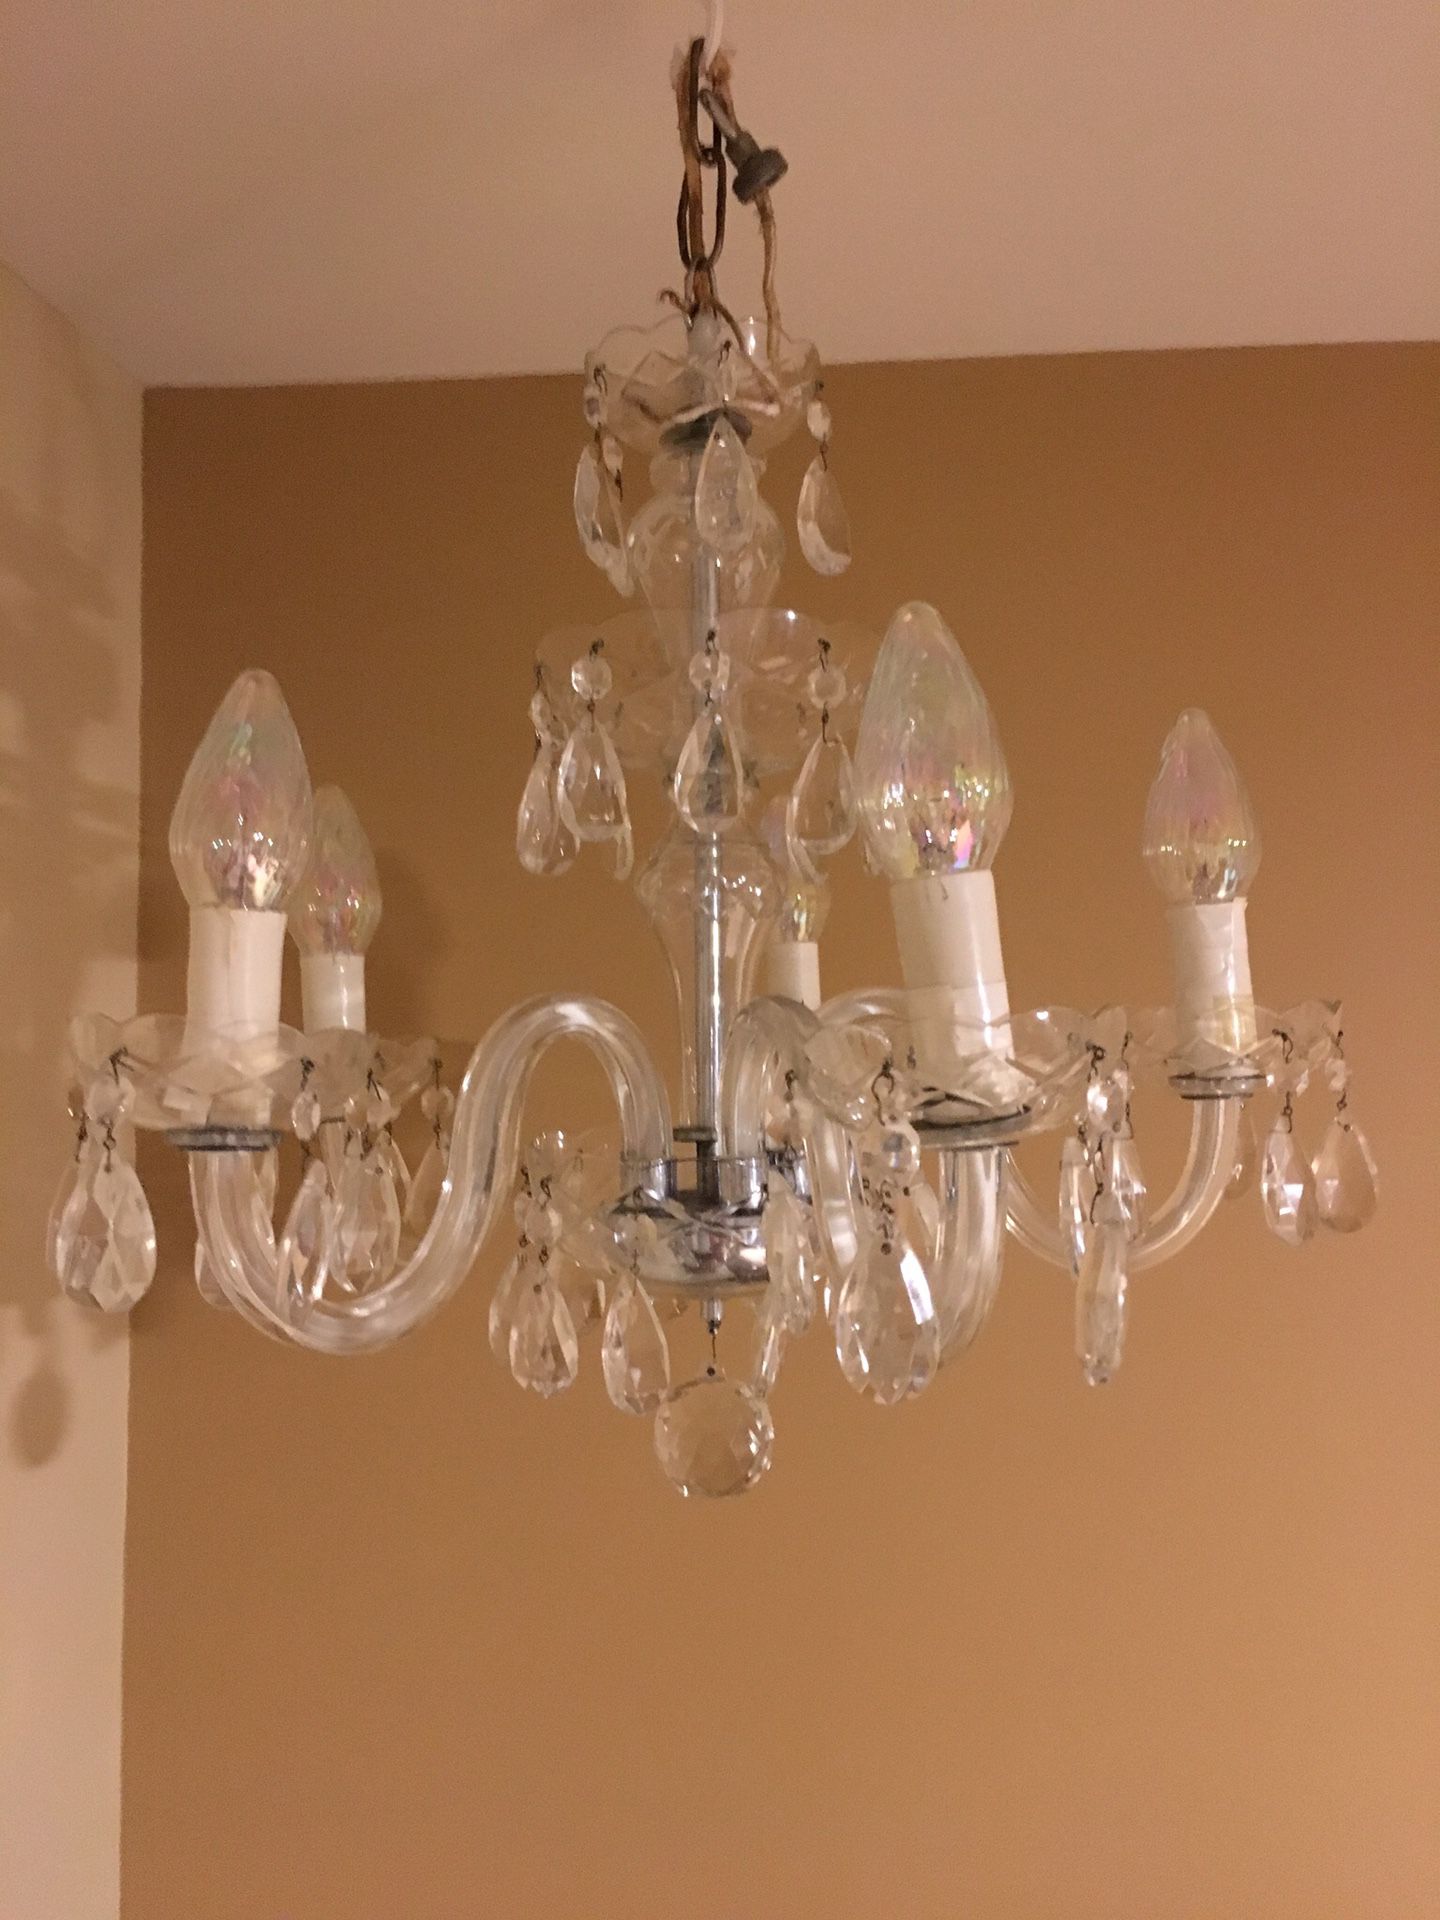 Small Antique Chandelier